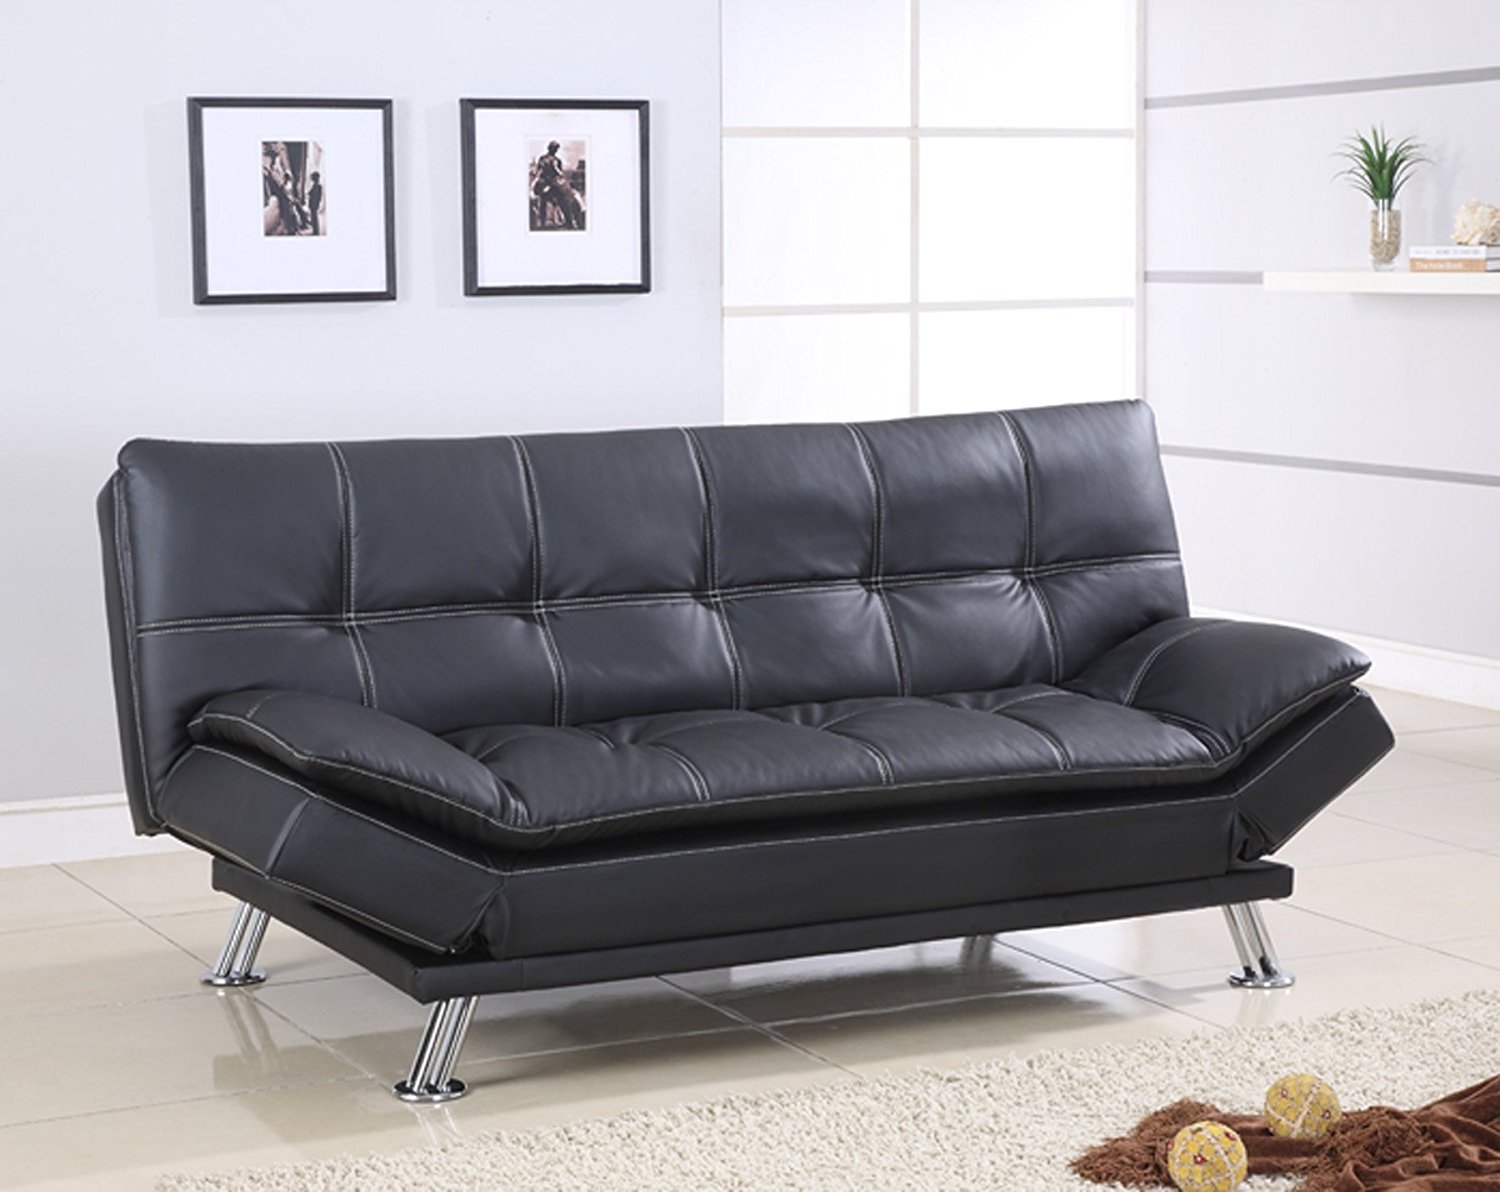 Best Quality Furniture S298 Sofa Bed Modern Black Faux Leather